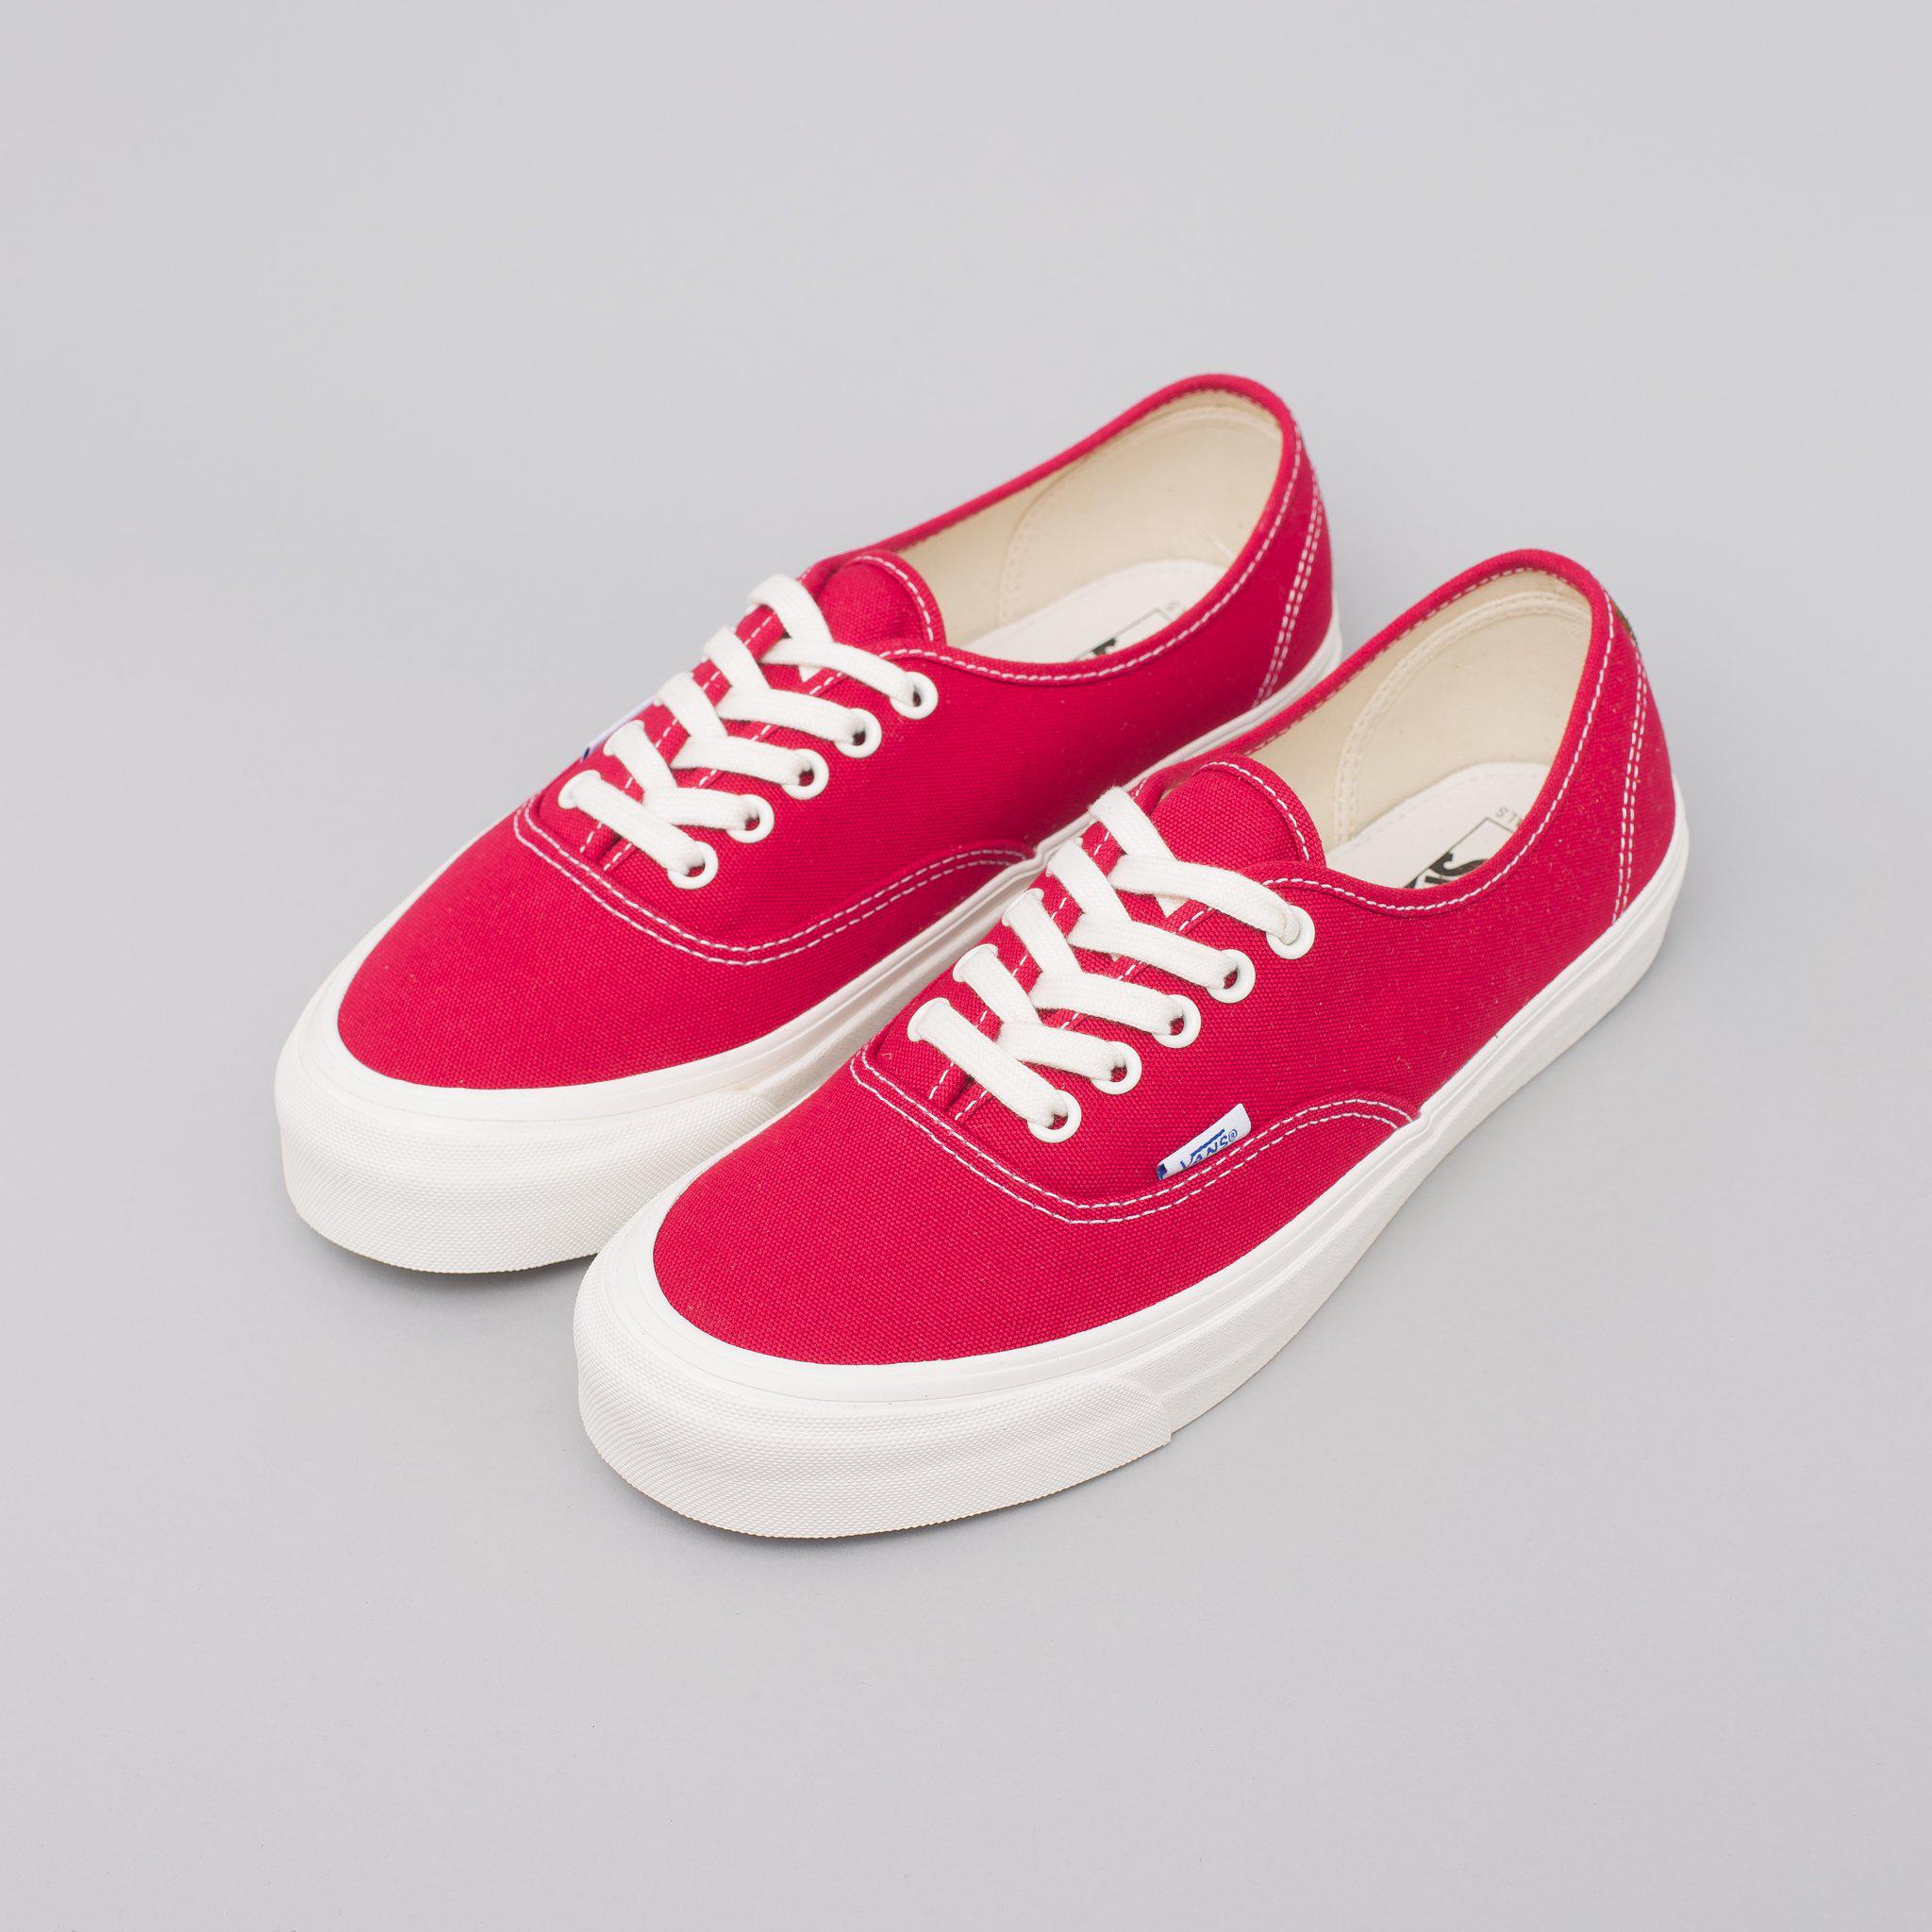 Vans Canvas Authentic Lx In Chili Pepper in Pink for Men - Lyst